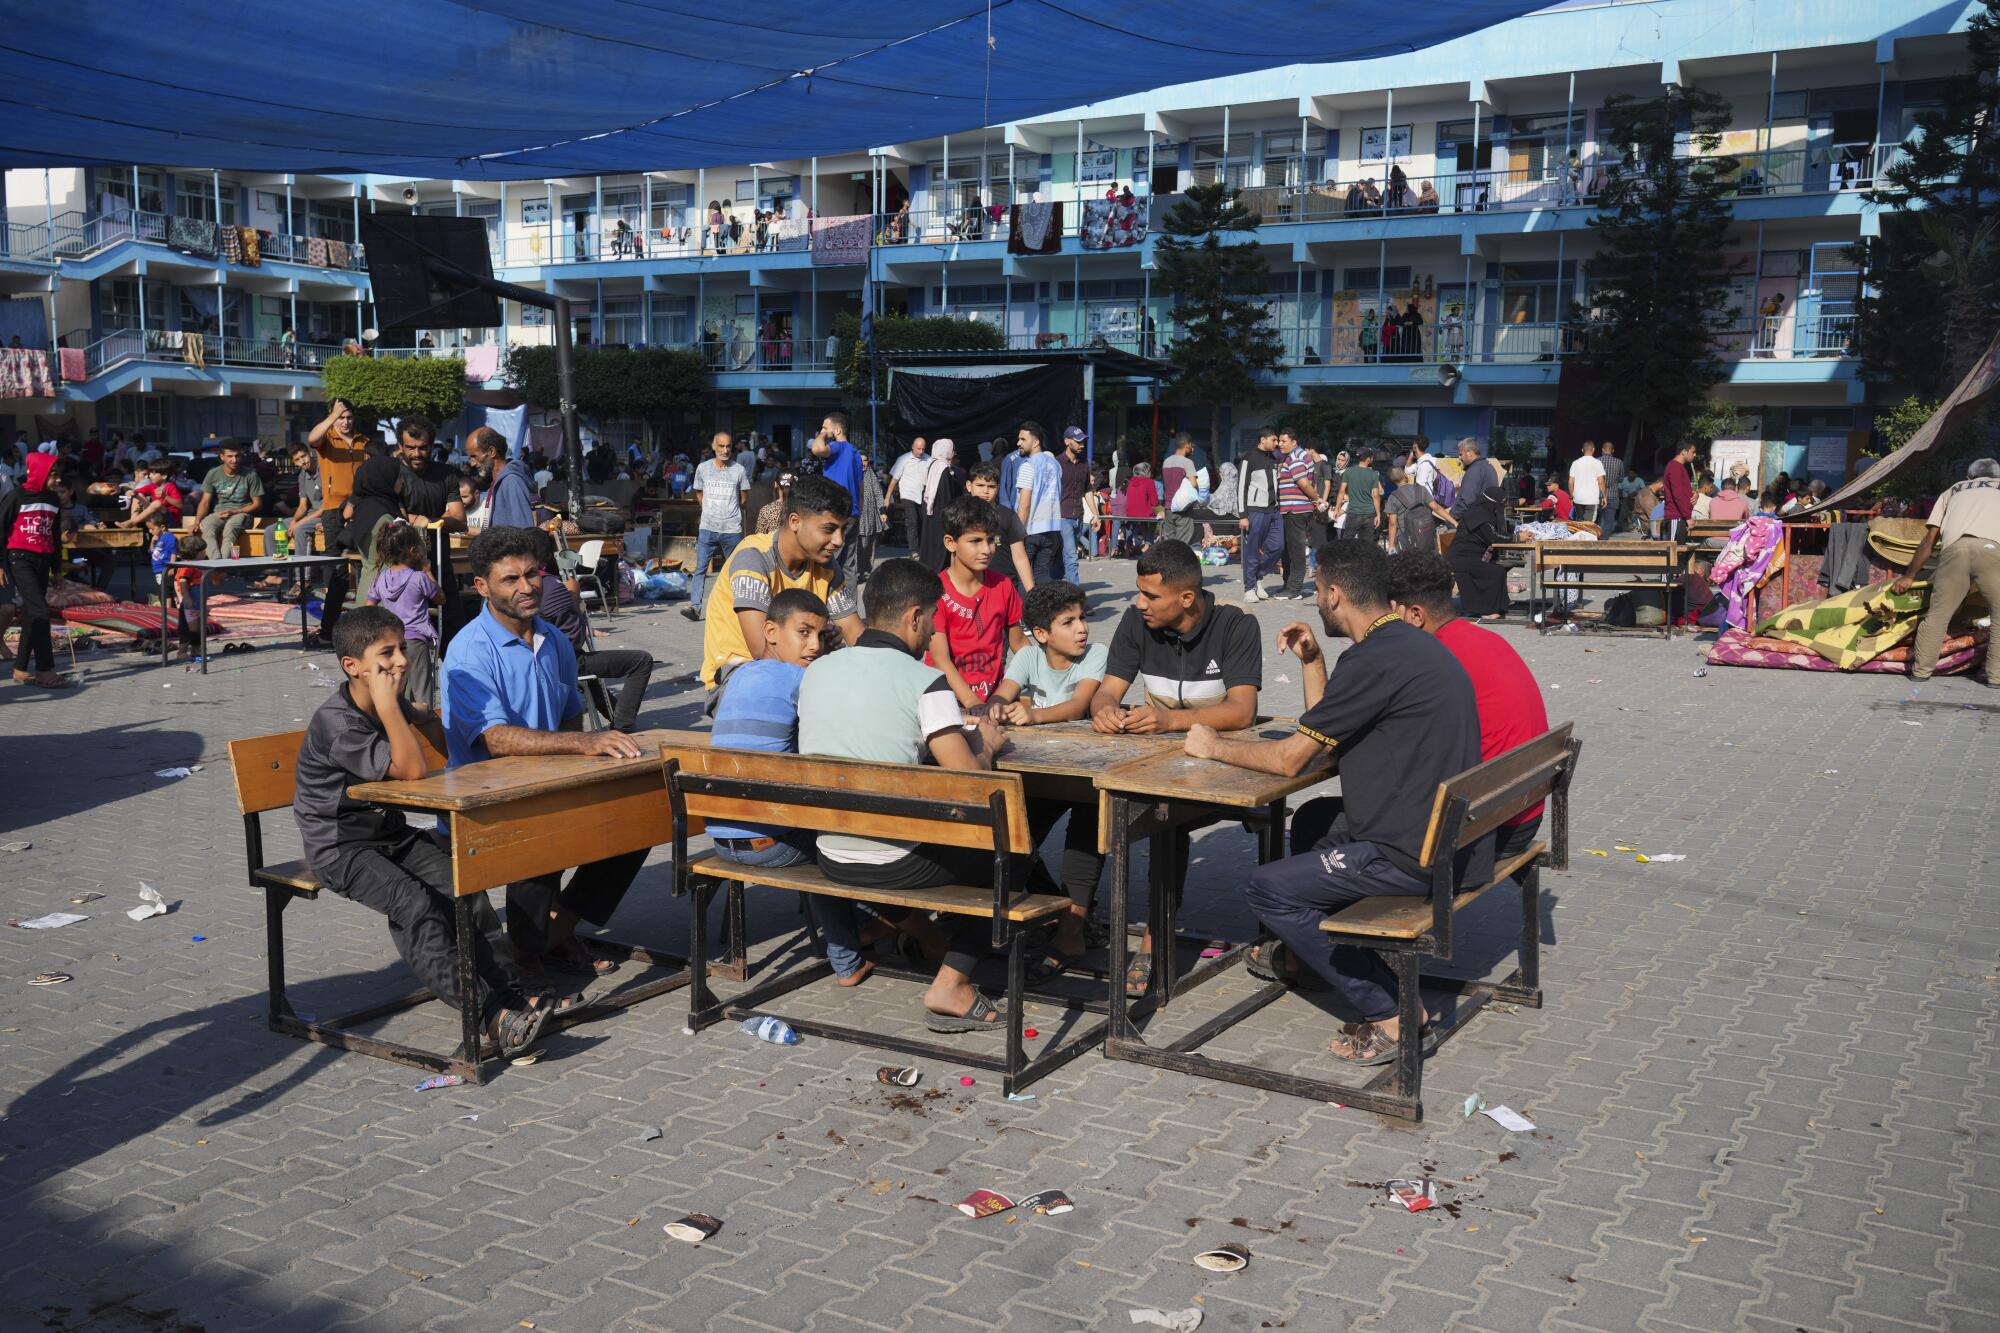 Palestinians sheltering in a United Nations-run school in Gaza